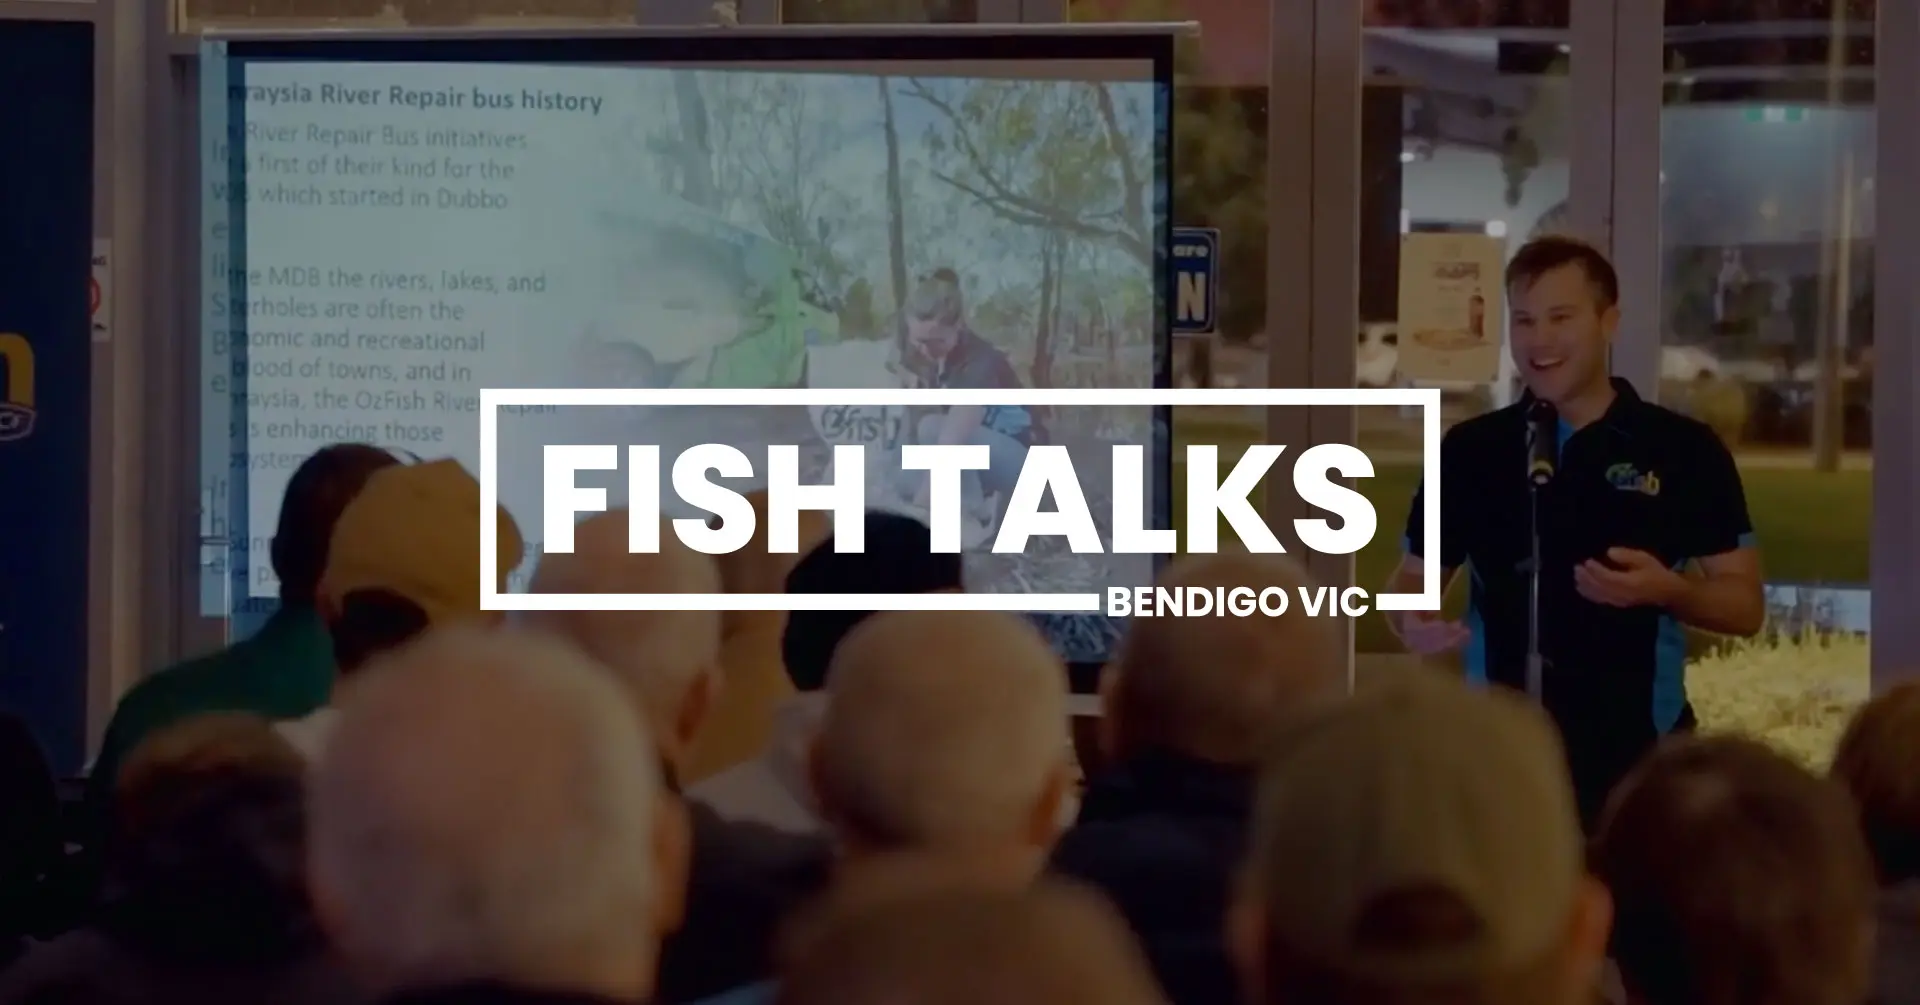 The background is of a person presenting to an audience and the foreground is a logo that says Fish Talks Bendigo